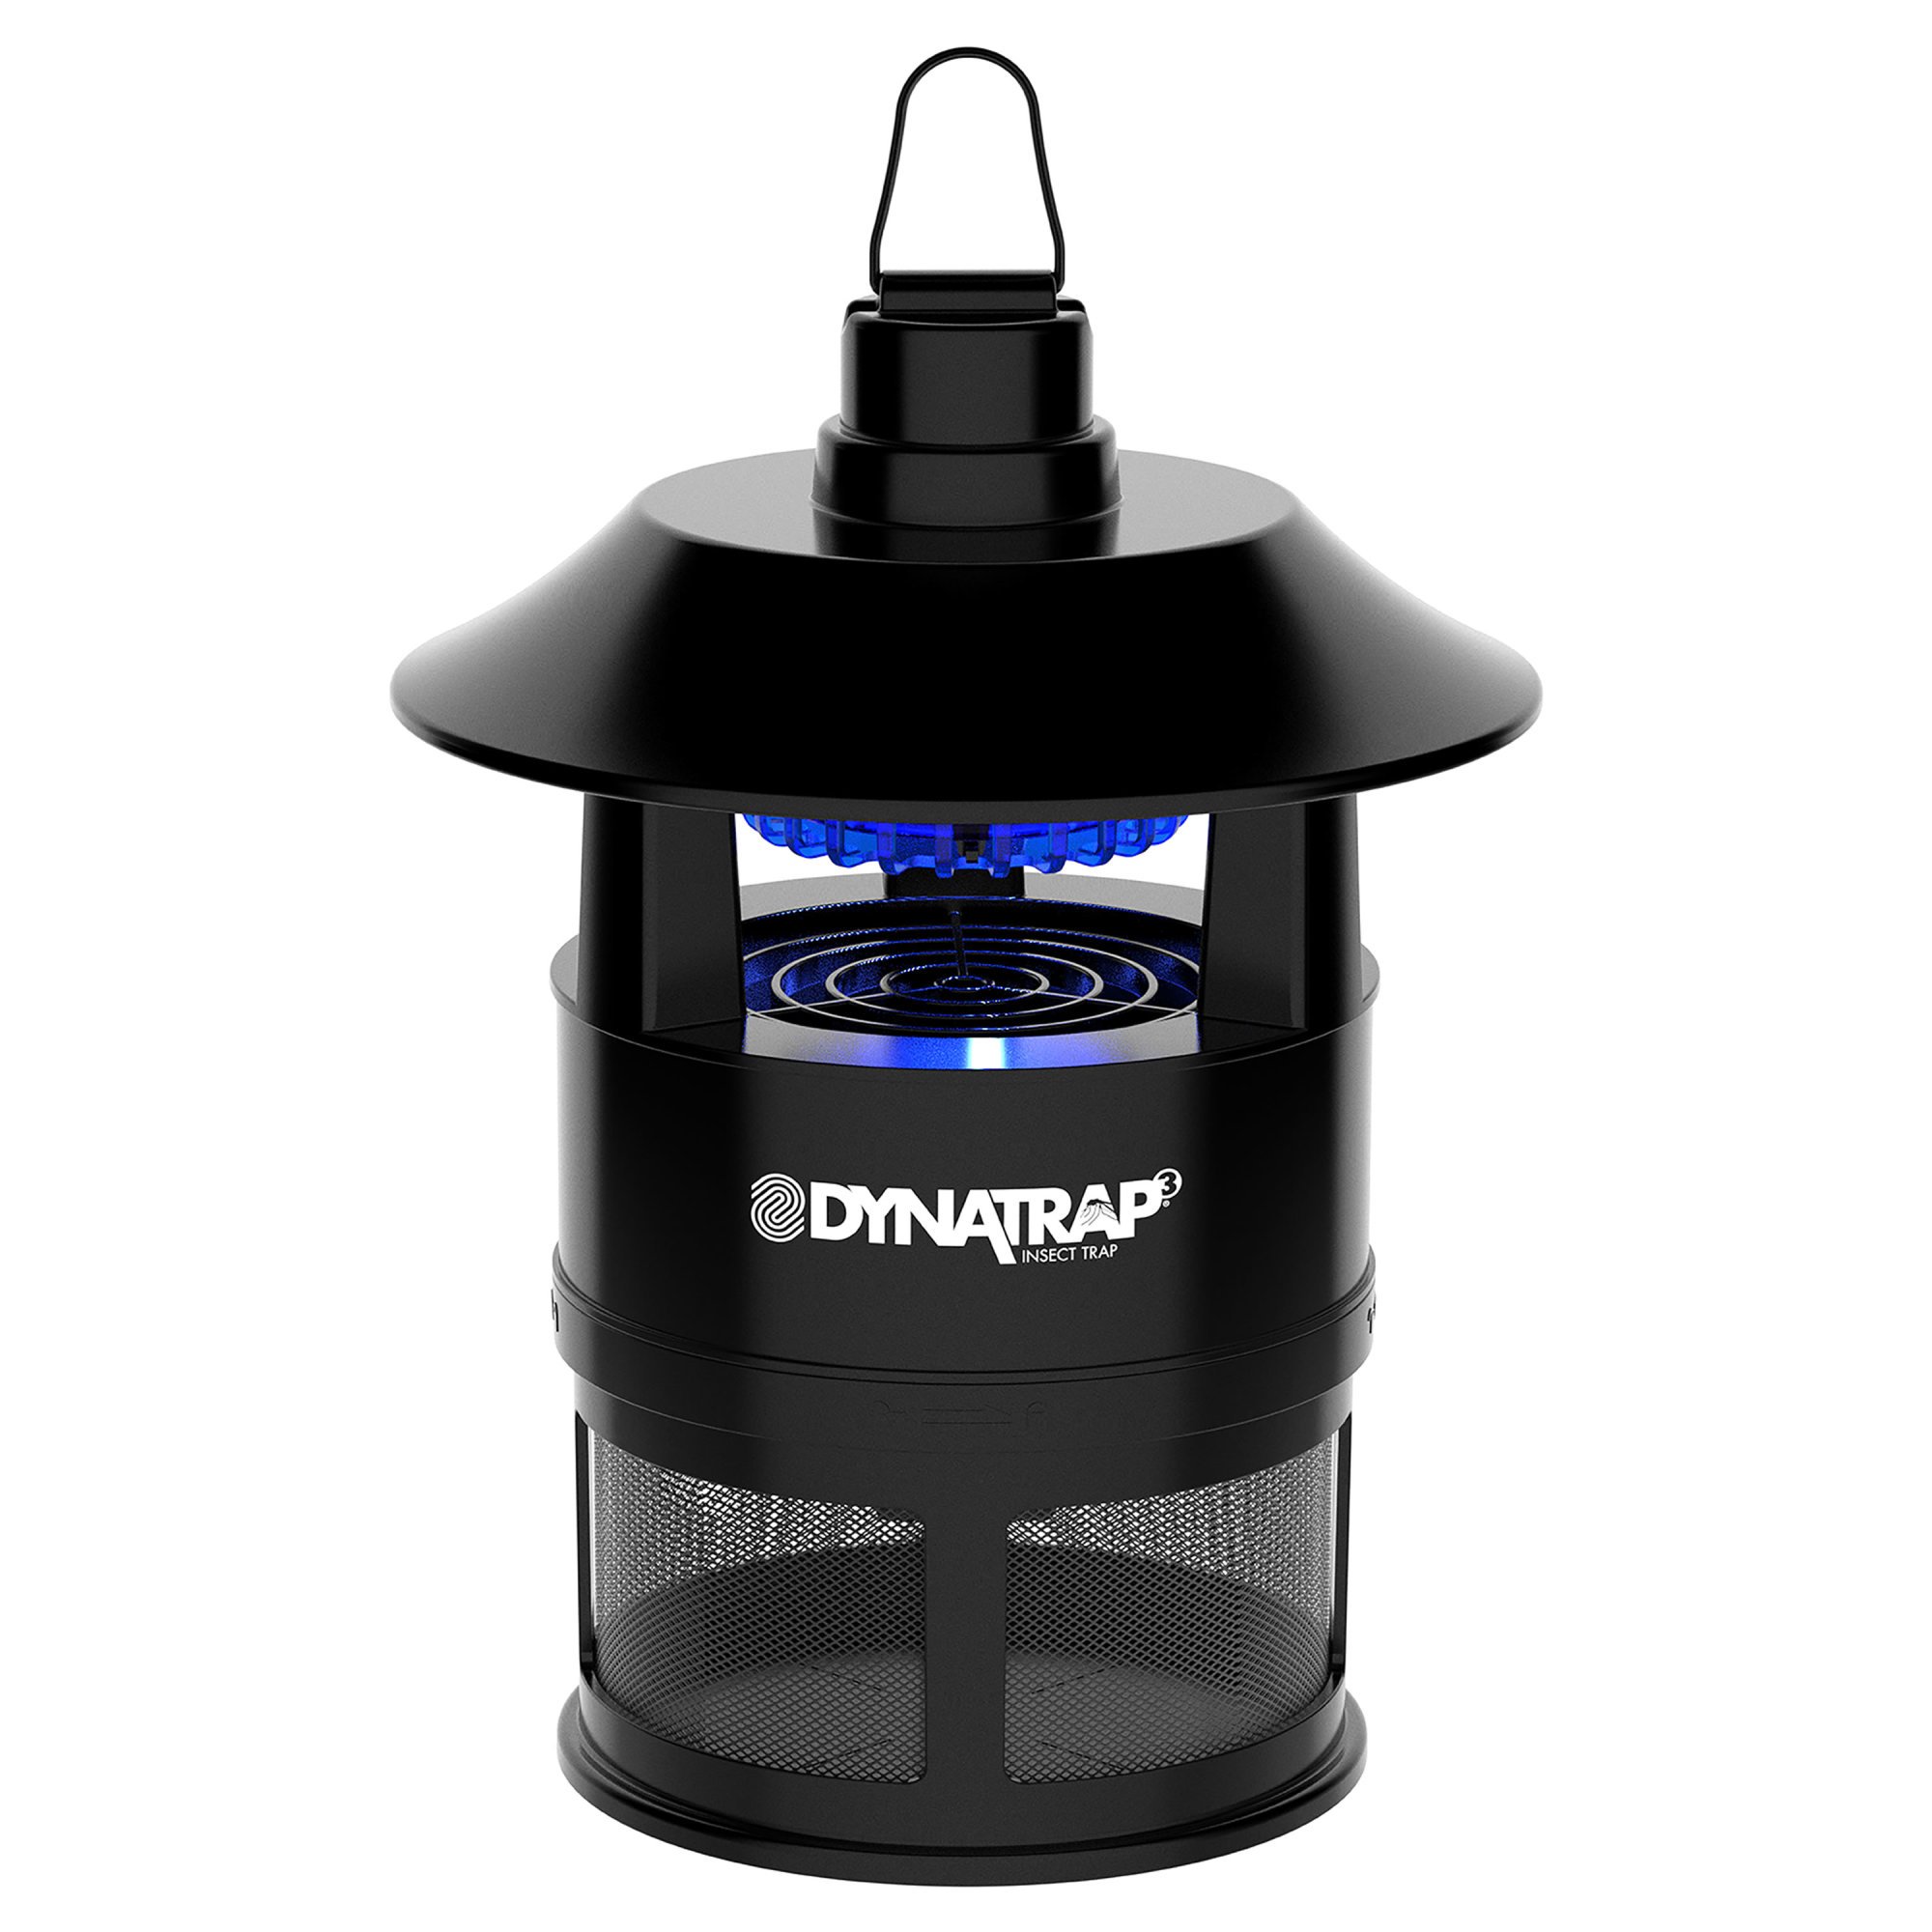 Dynatrap DT1775 1 Acre Insect & Mosquito Trap